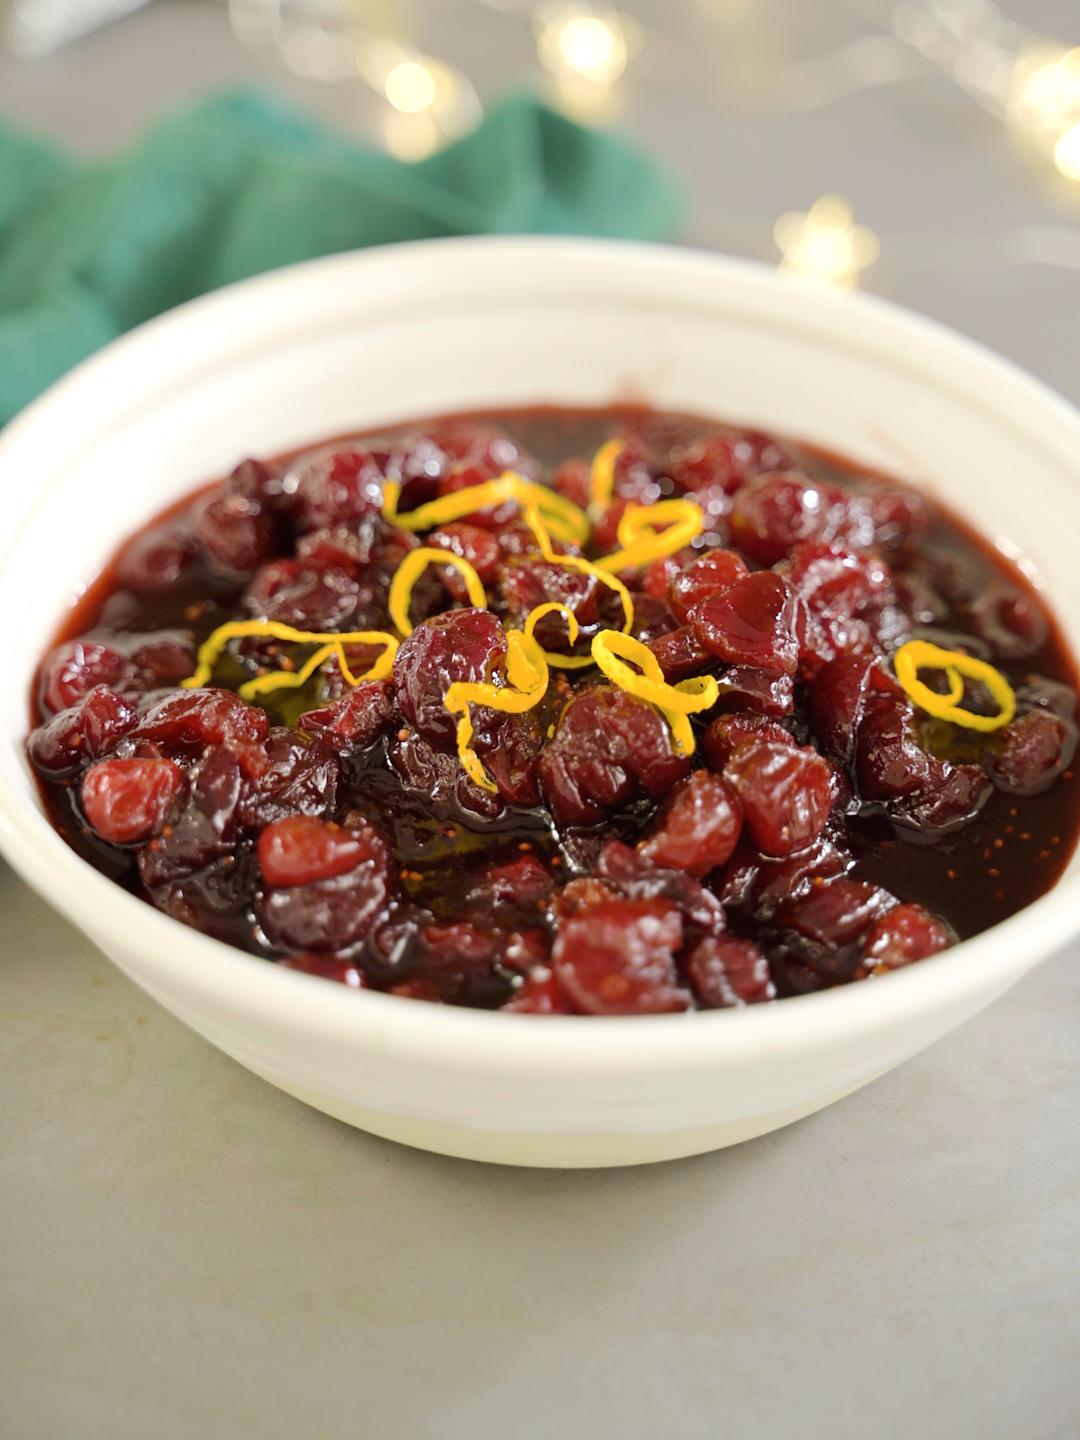 Cranberry Sauce with Orange and Spices